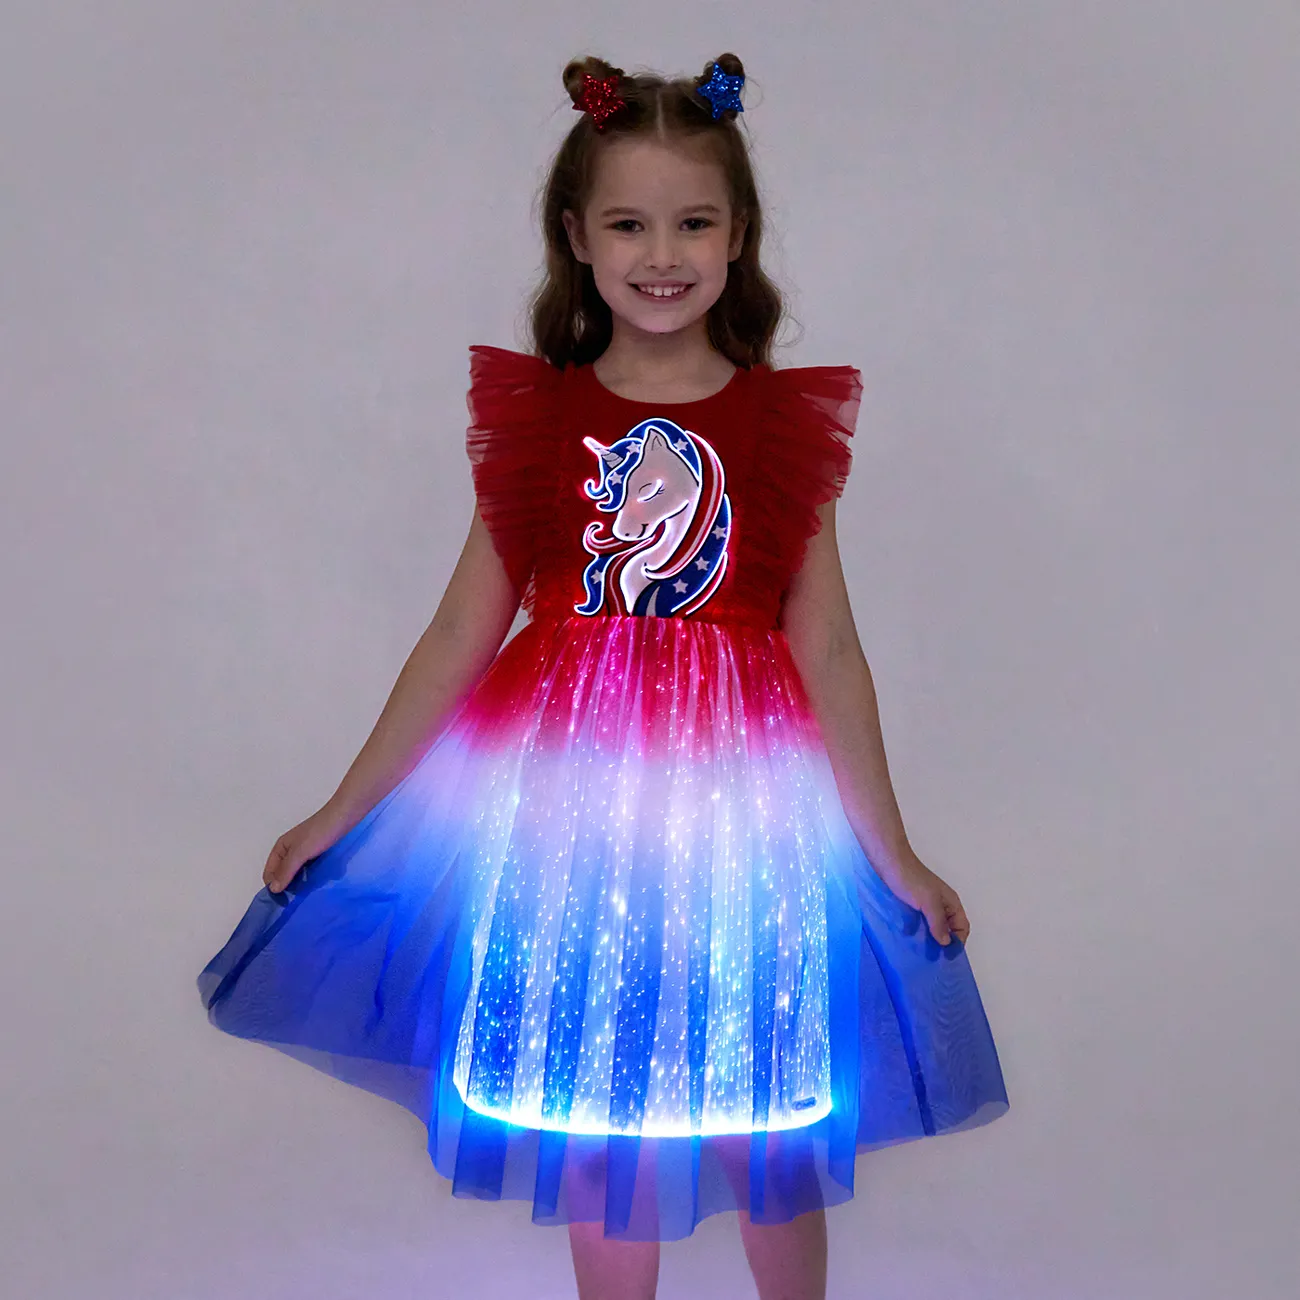 Go-Glow Illuminating Unicorn Red Dress with Light Up Gradient Skirt Including Controller (Battery Inside) Red/White big image 1